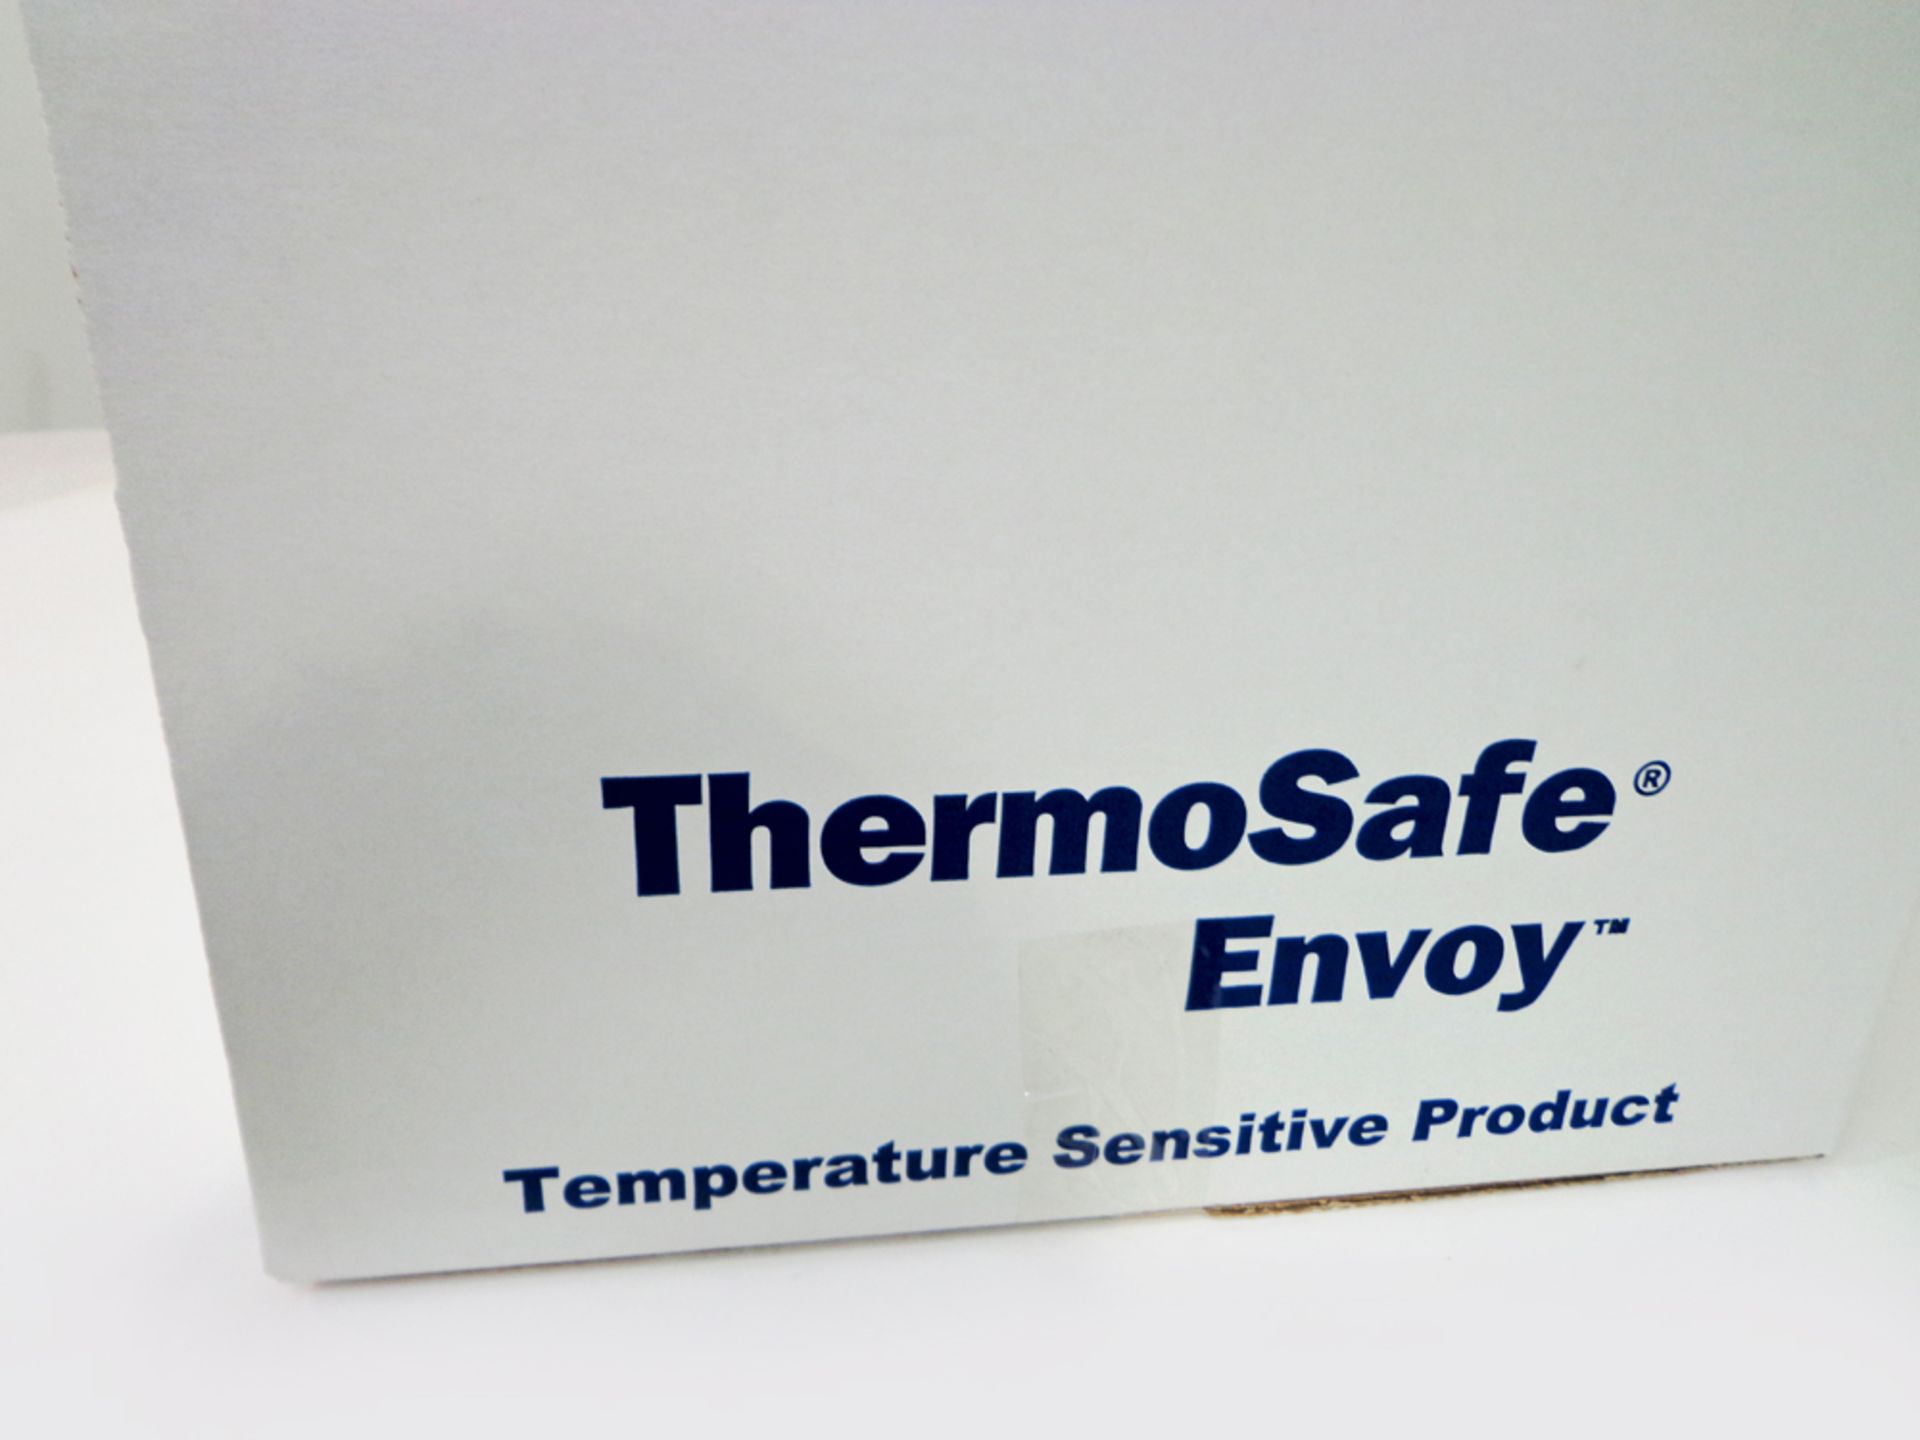 Sonoco ThermoSafe Envoy Insulated Container (each). - Image 2 of 8